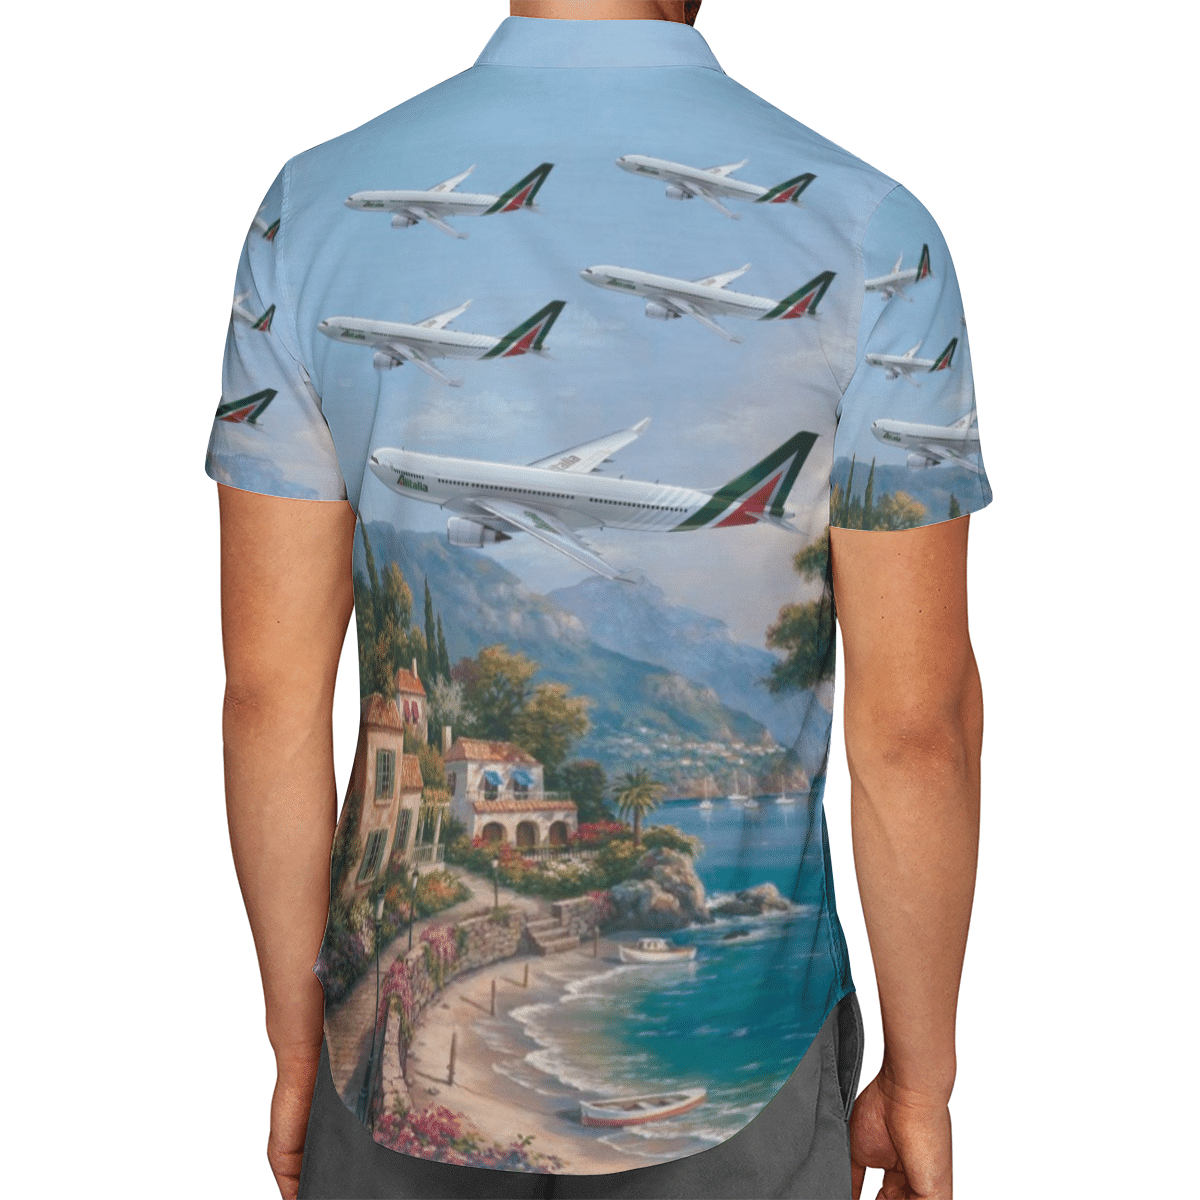 Going to the beach with a quality shirt 90